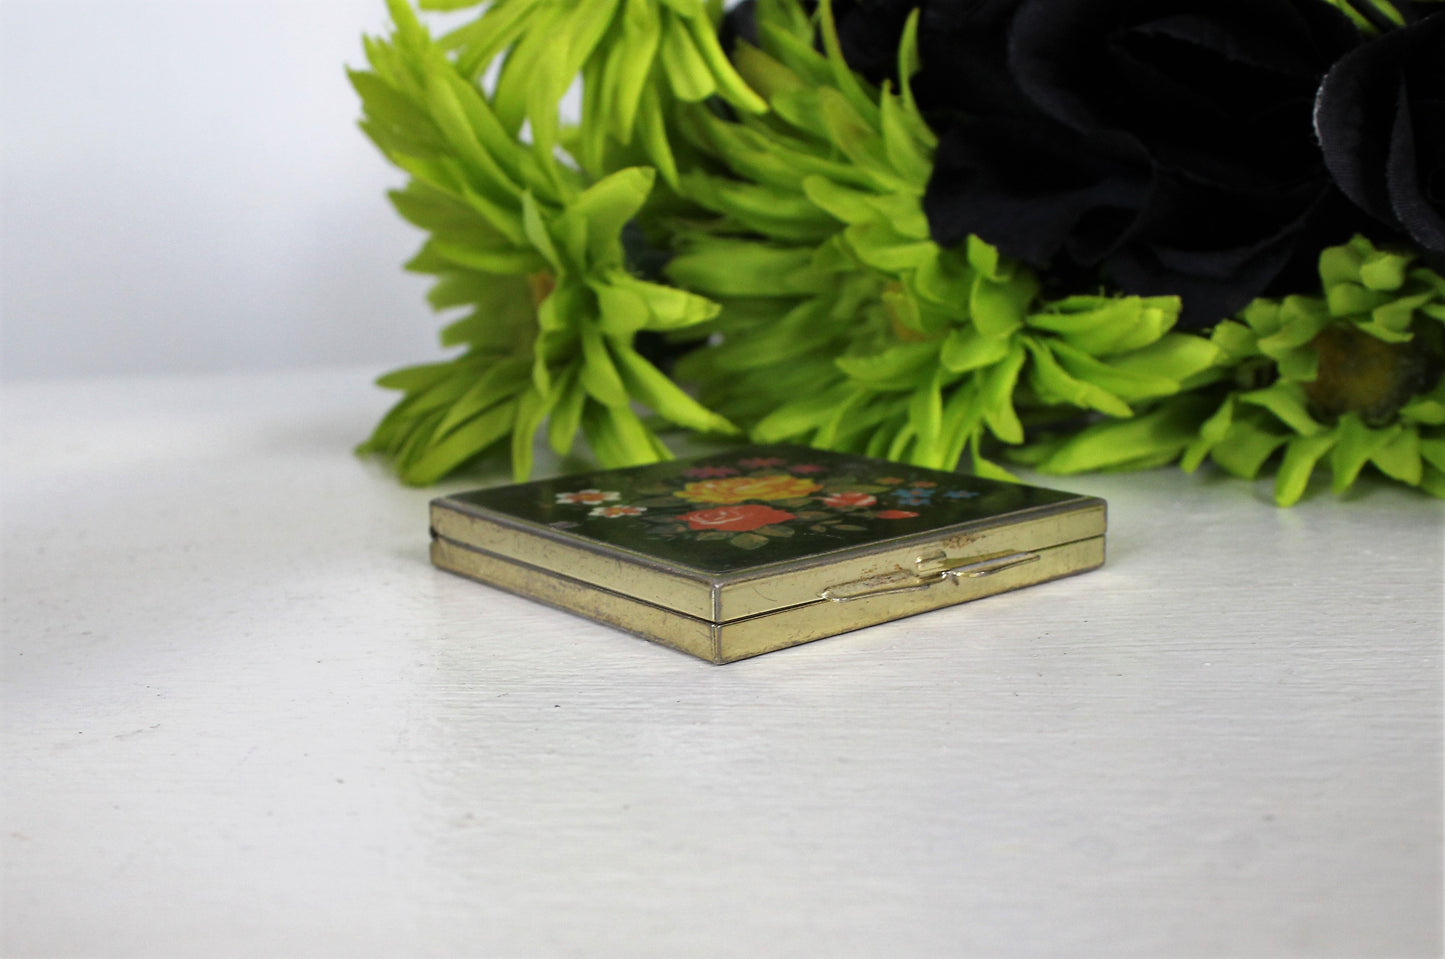 Vintage 1960s Pill Box With Floral Lid